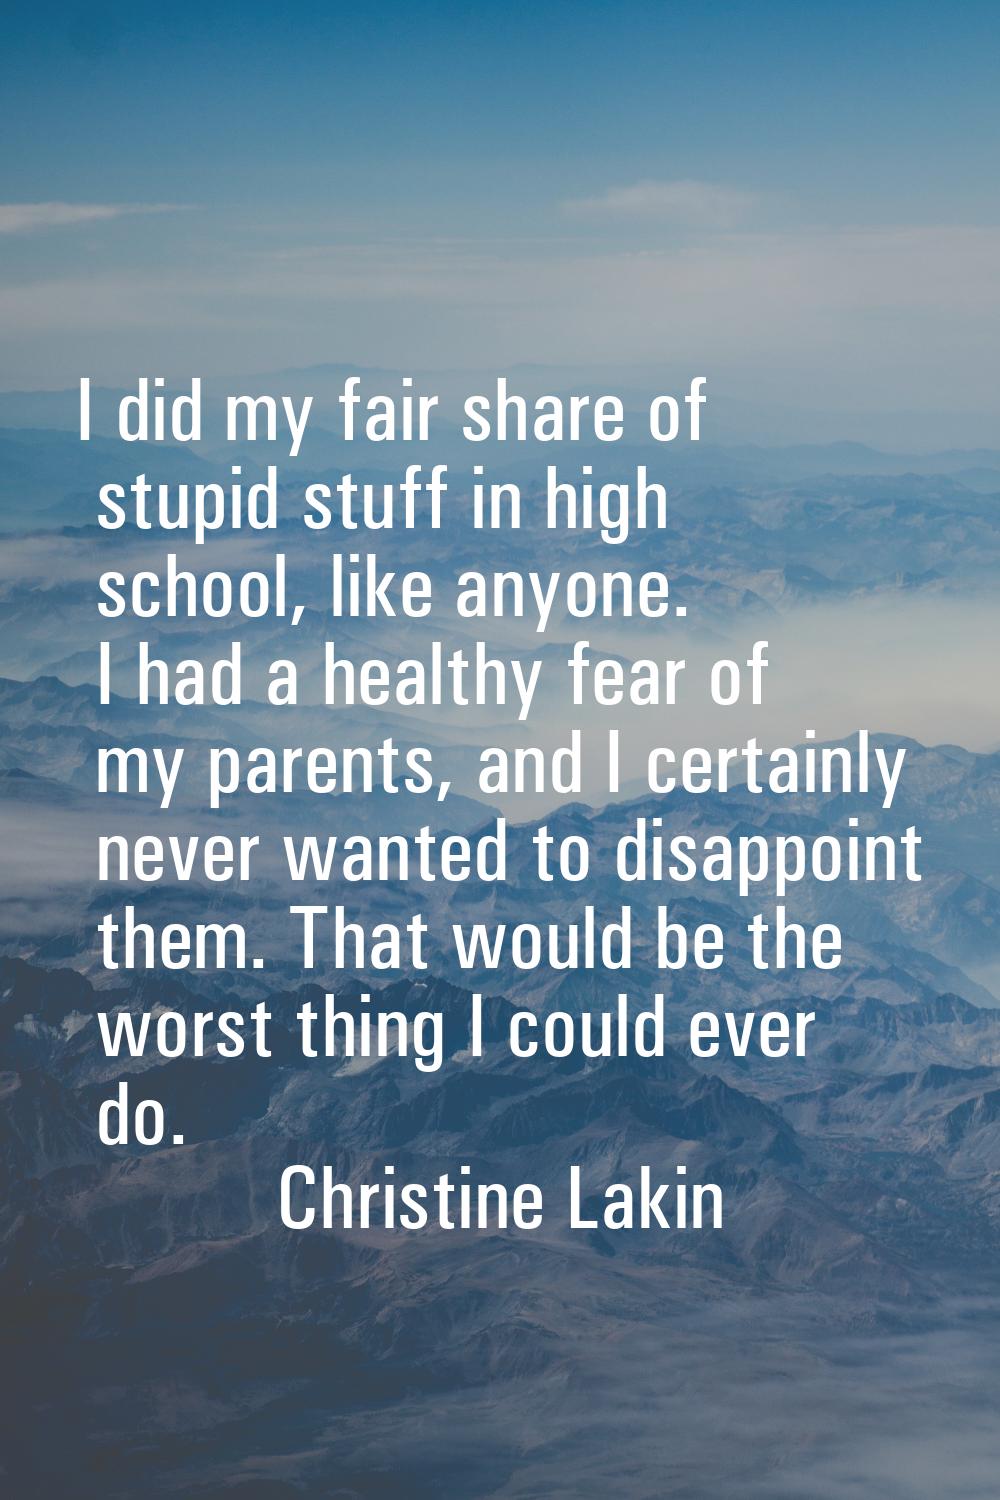 I did my fair share of stupid stuff in high school, like anyone. I had a healthy fear of my parents